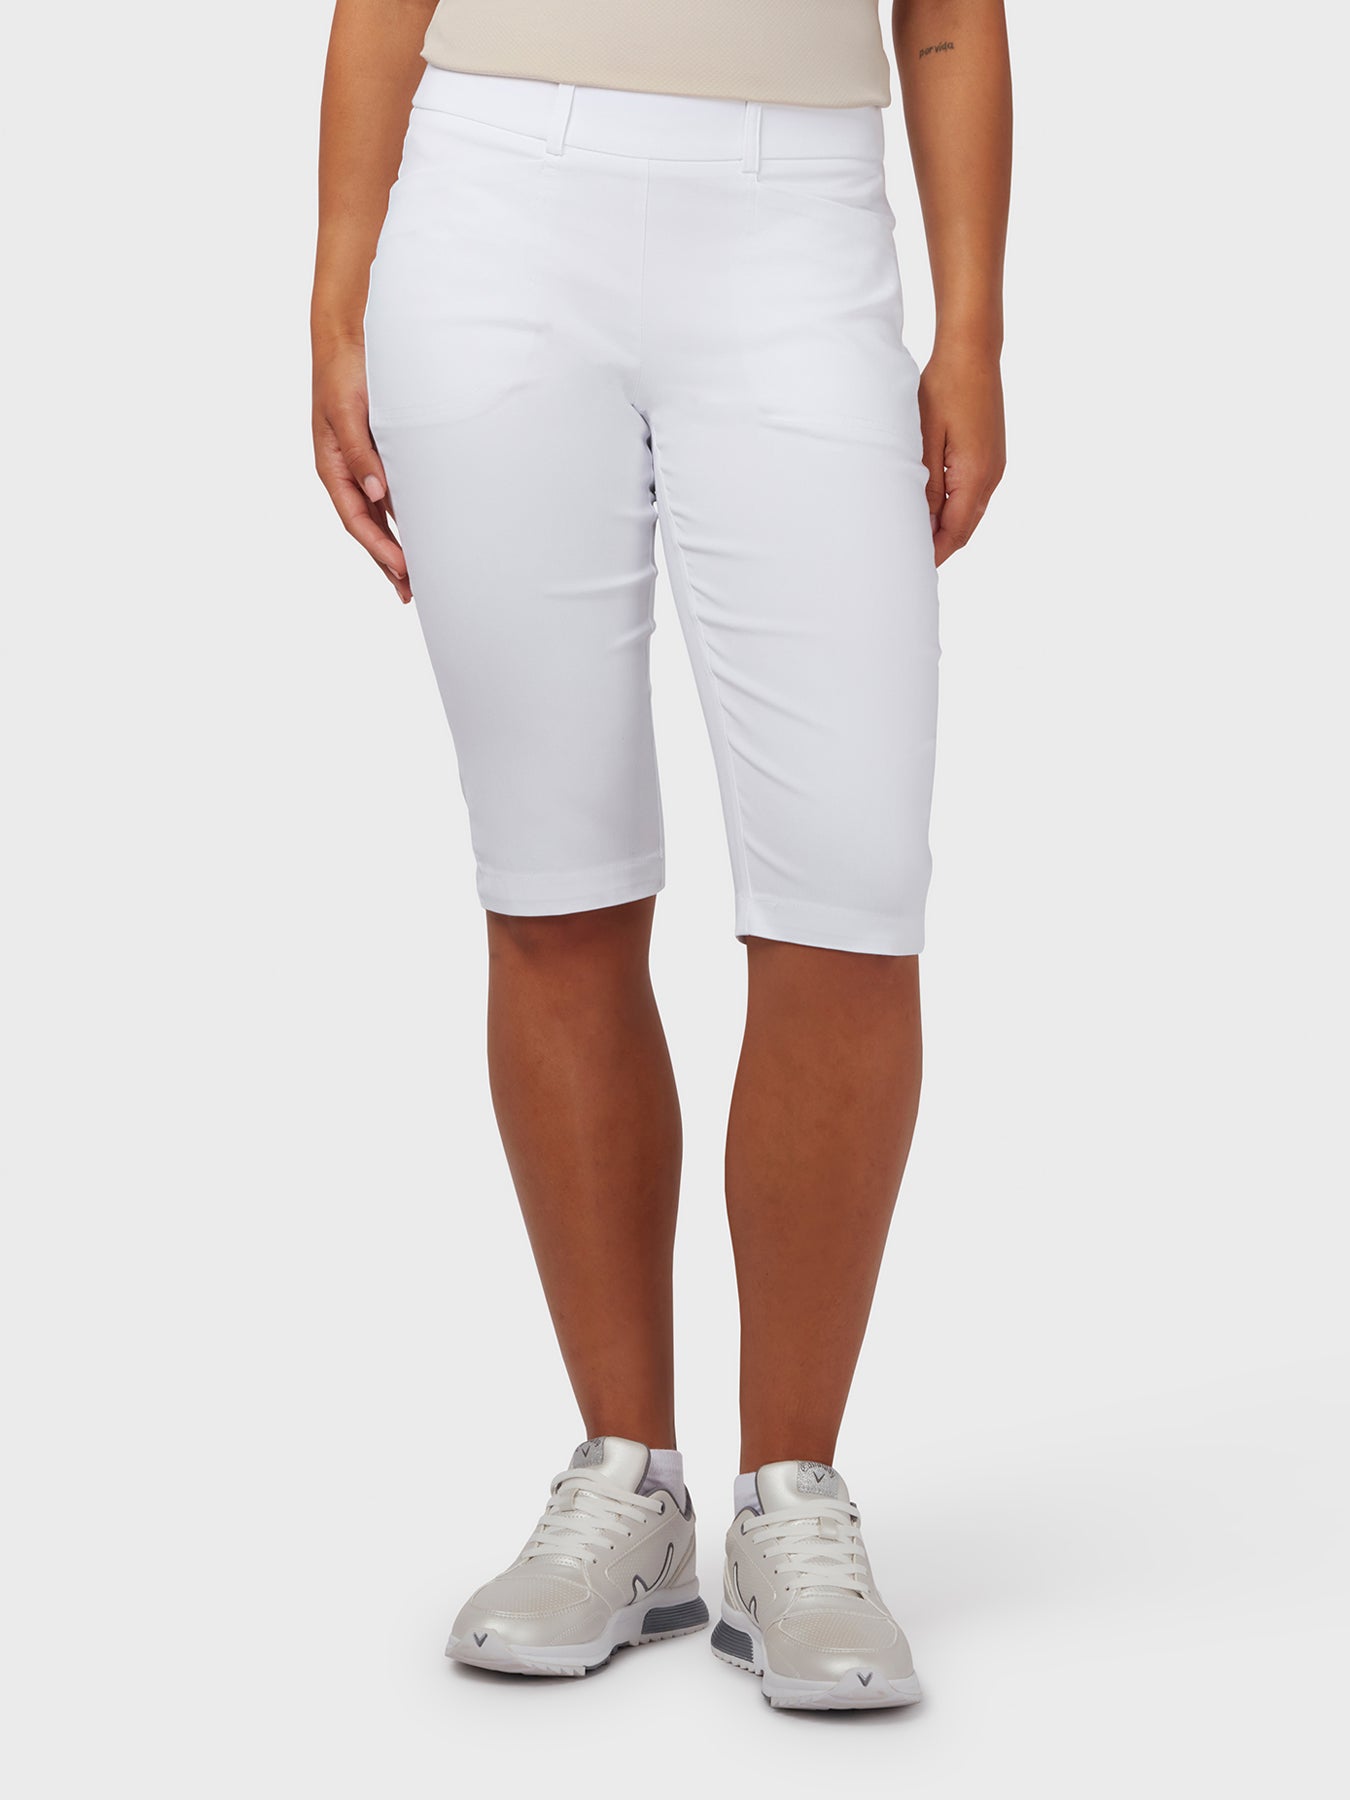 View 34 Truesculpt Womens Shorts In Brilliant White information